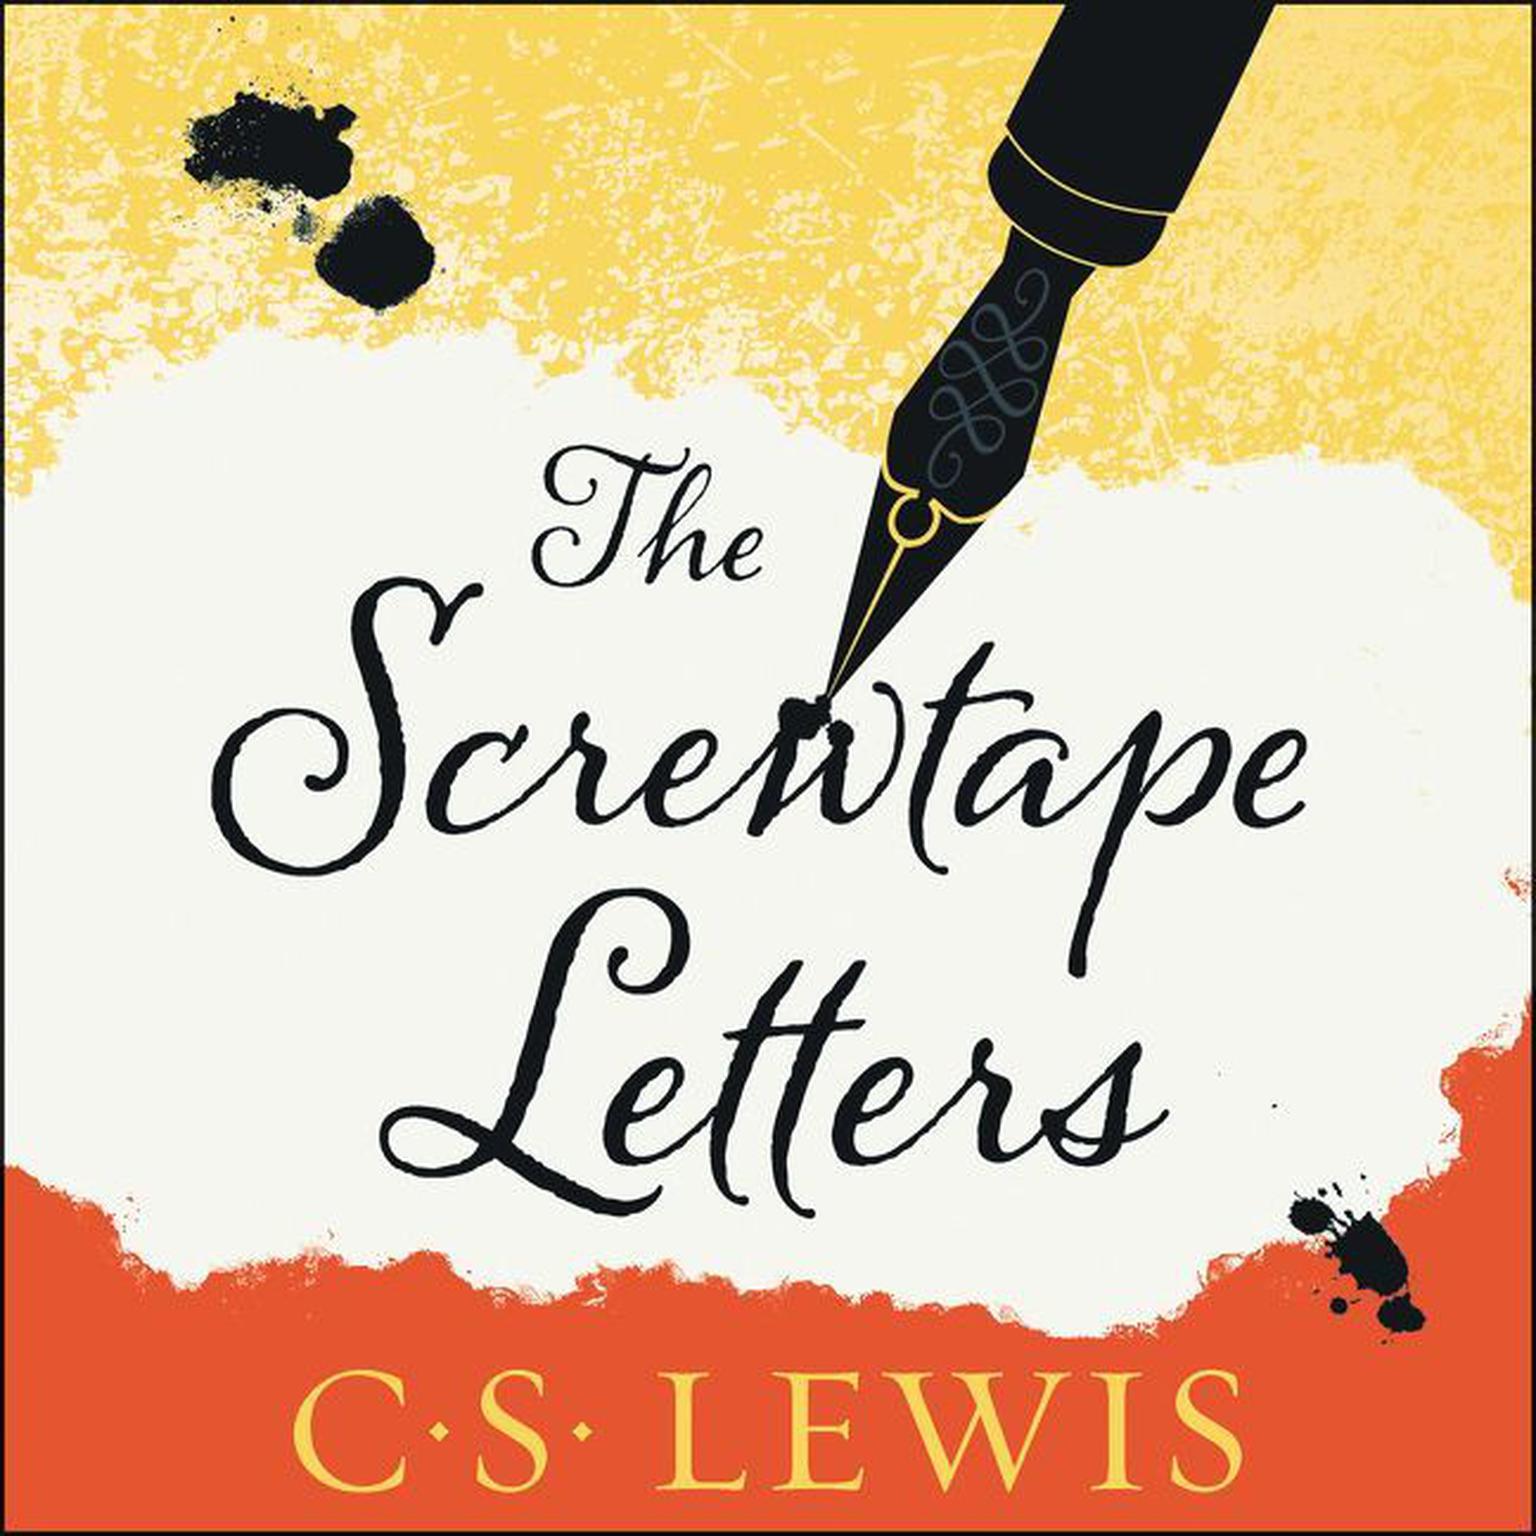 The Screwtape Letters Audiobook, by C. S. Lewis